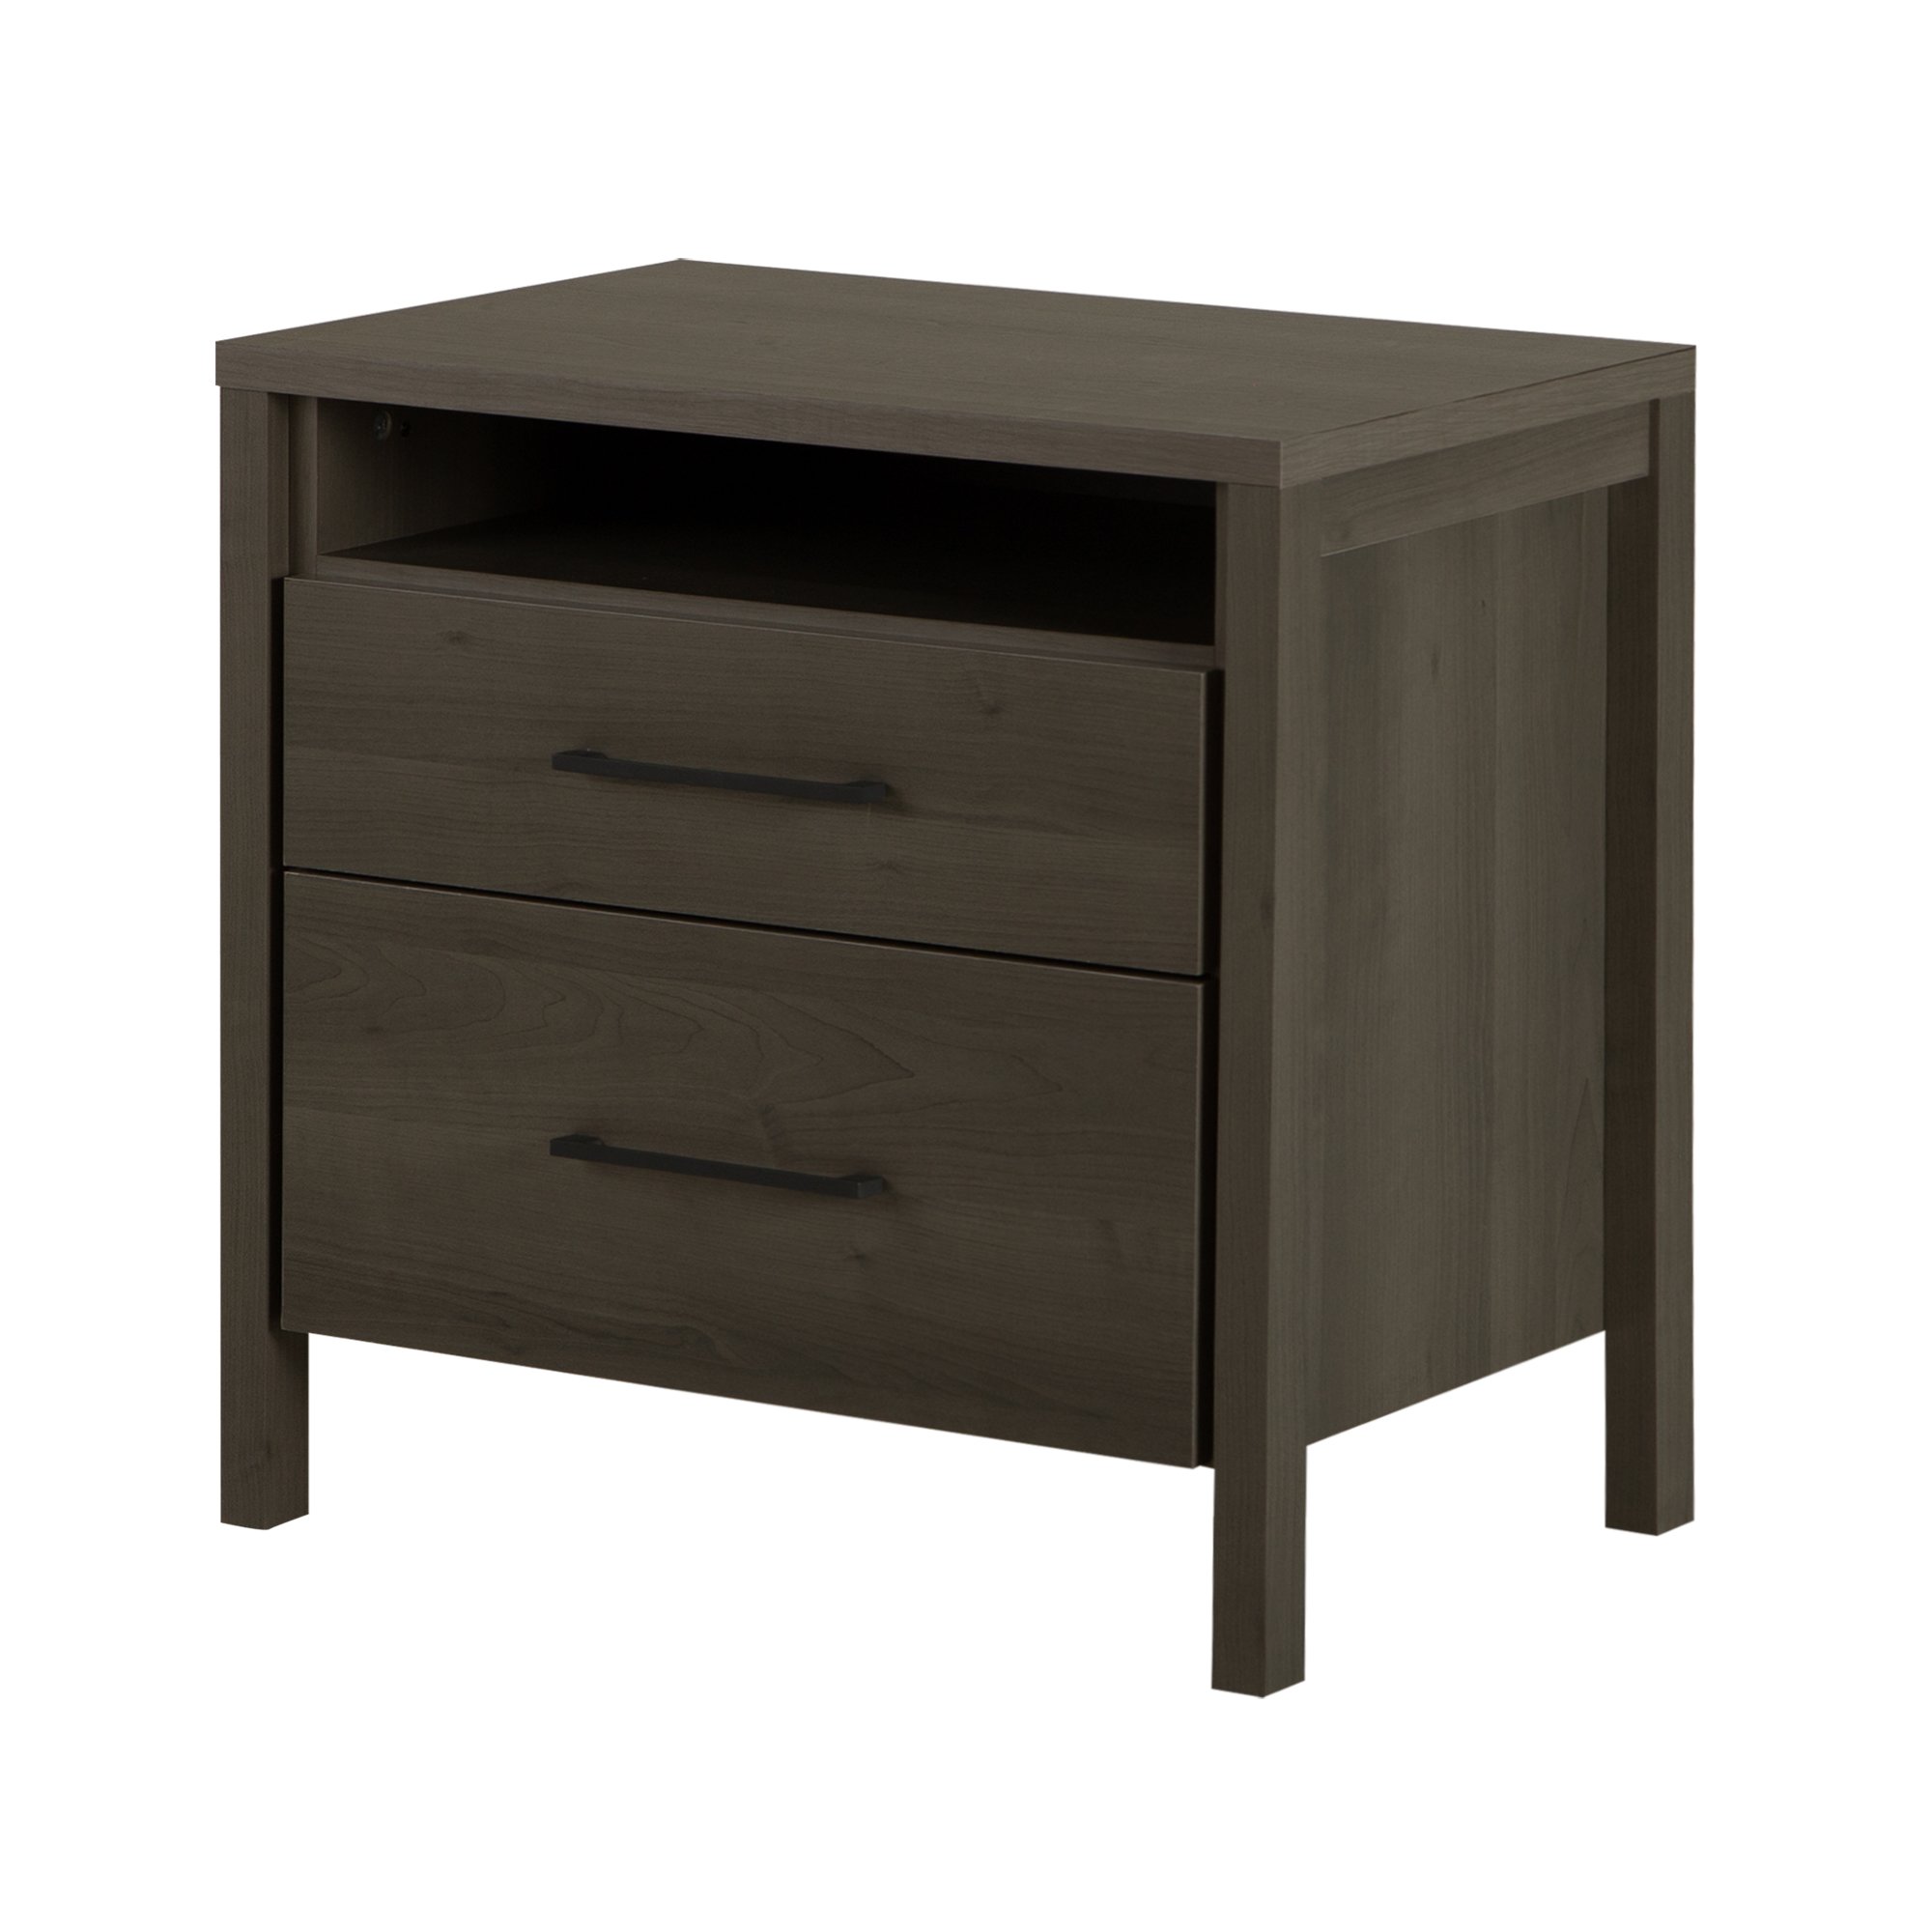 nightstand industrial can slip out the bedroom and stainless steel iron bedside table nightstands metal side night stand dimensions west elm modern nigh parsons end wood patio